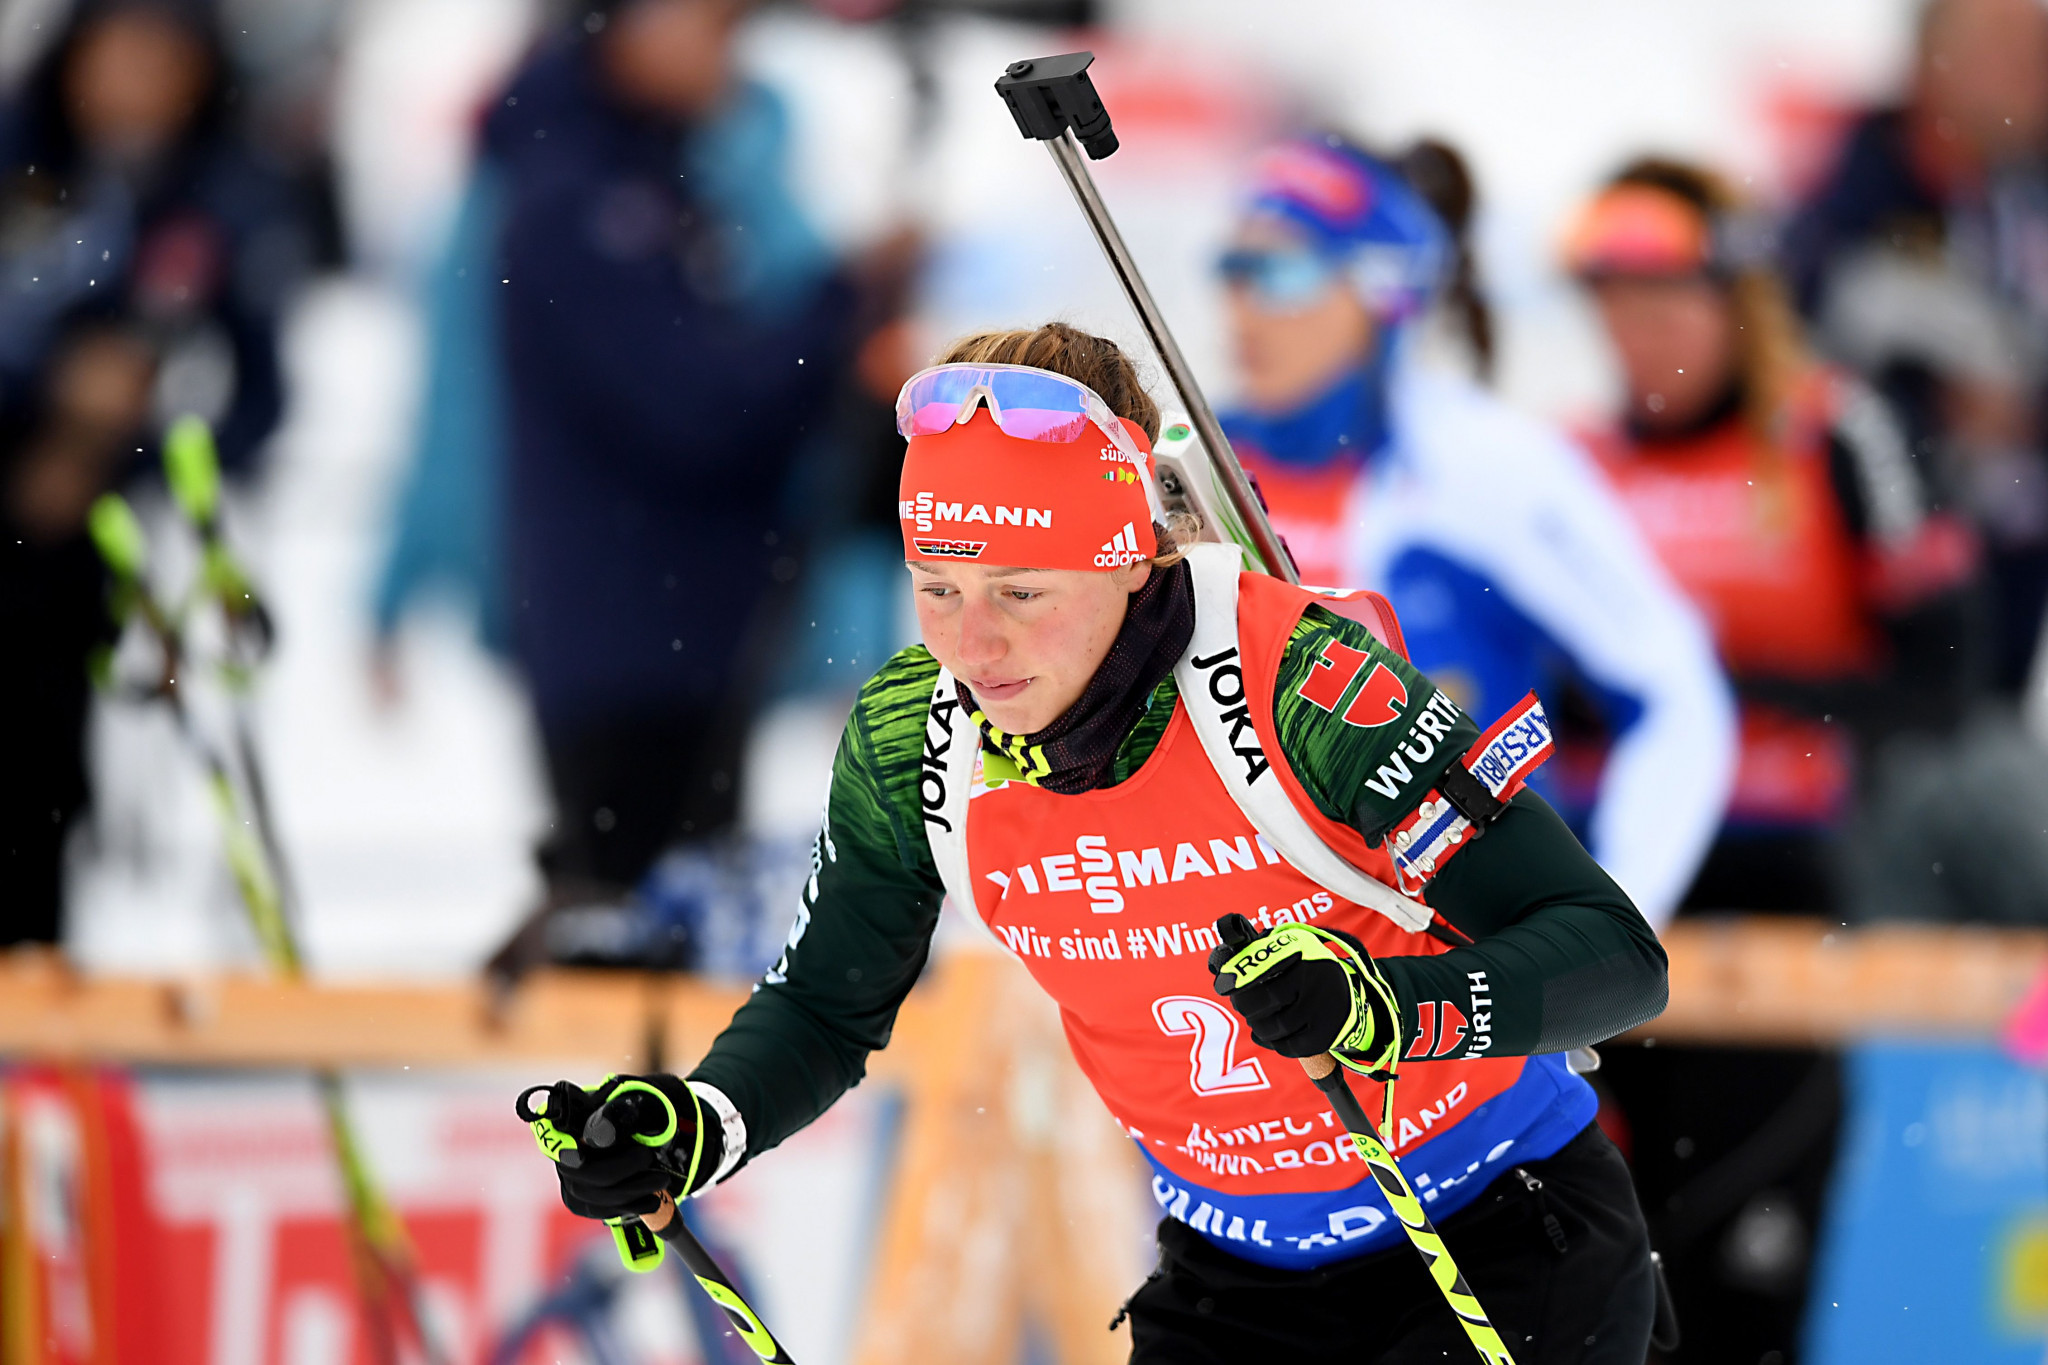 Laura Dahlmeier won for the first time this season in the women's race ©Getty Images